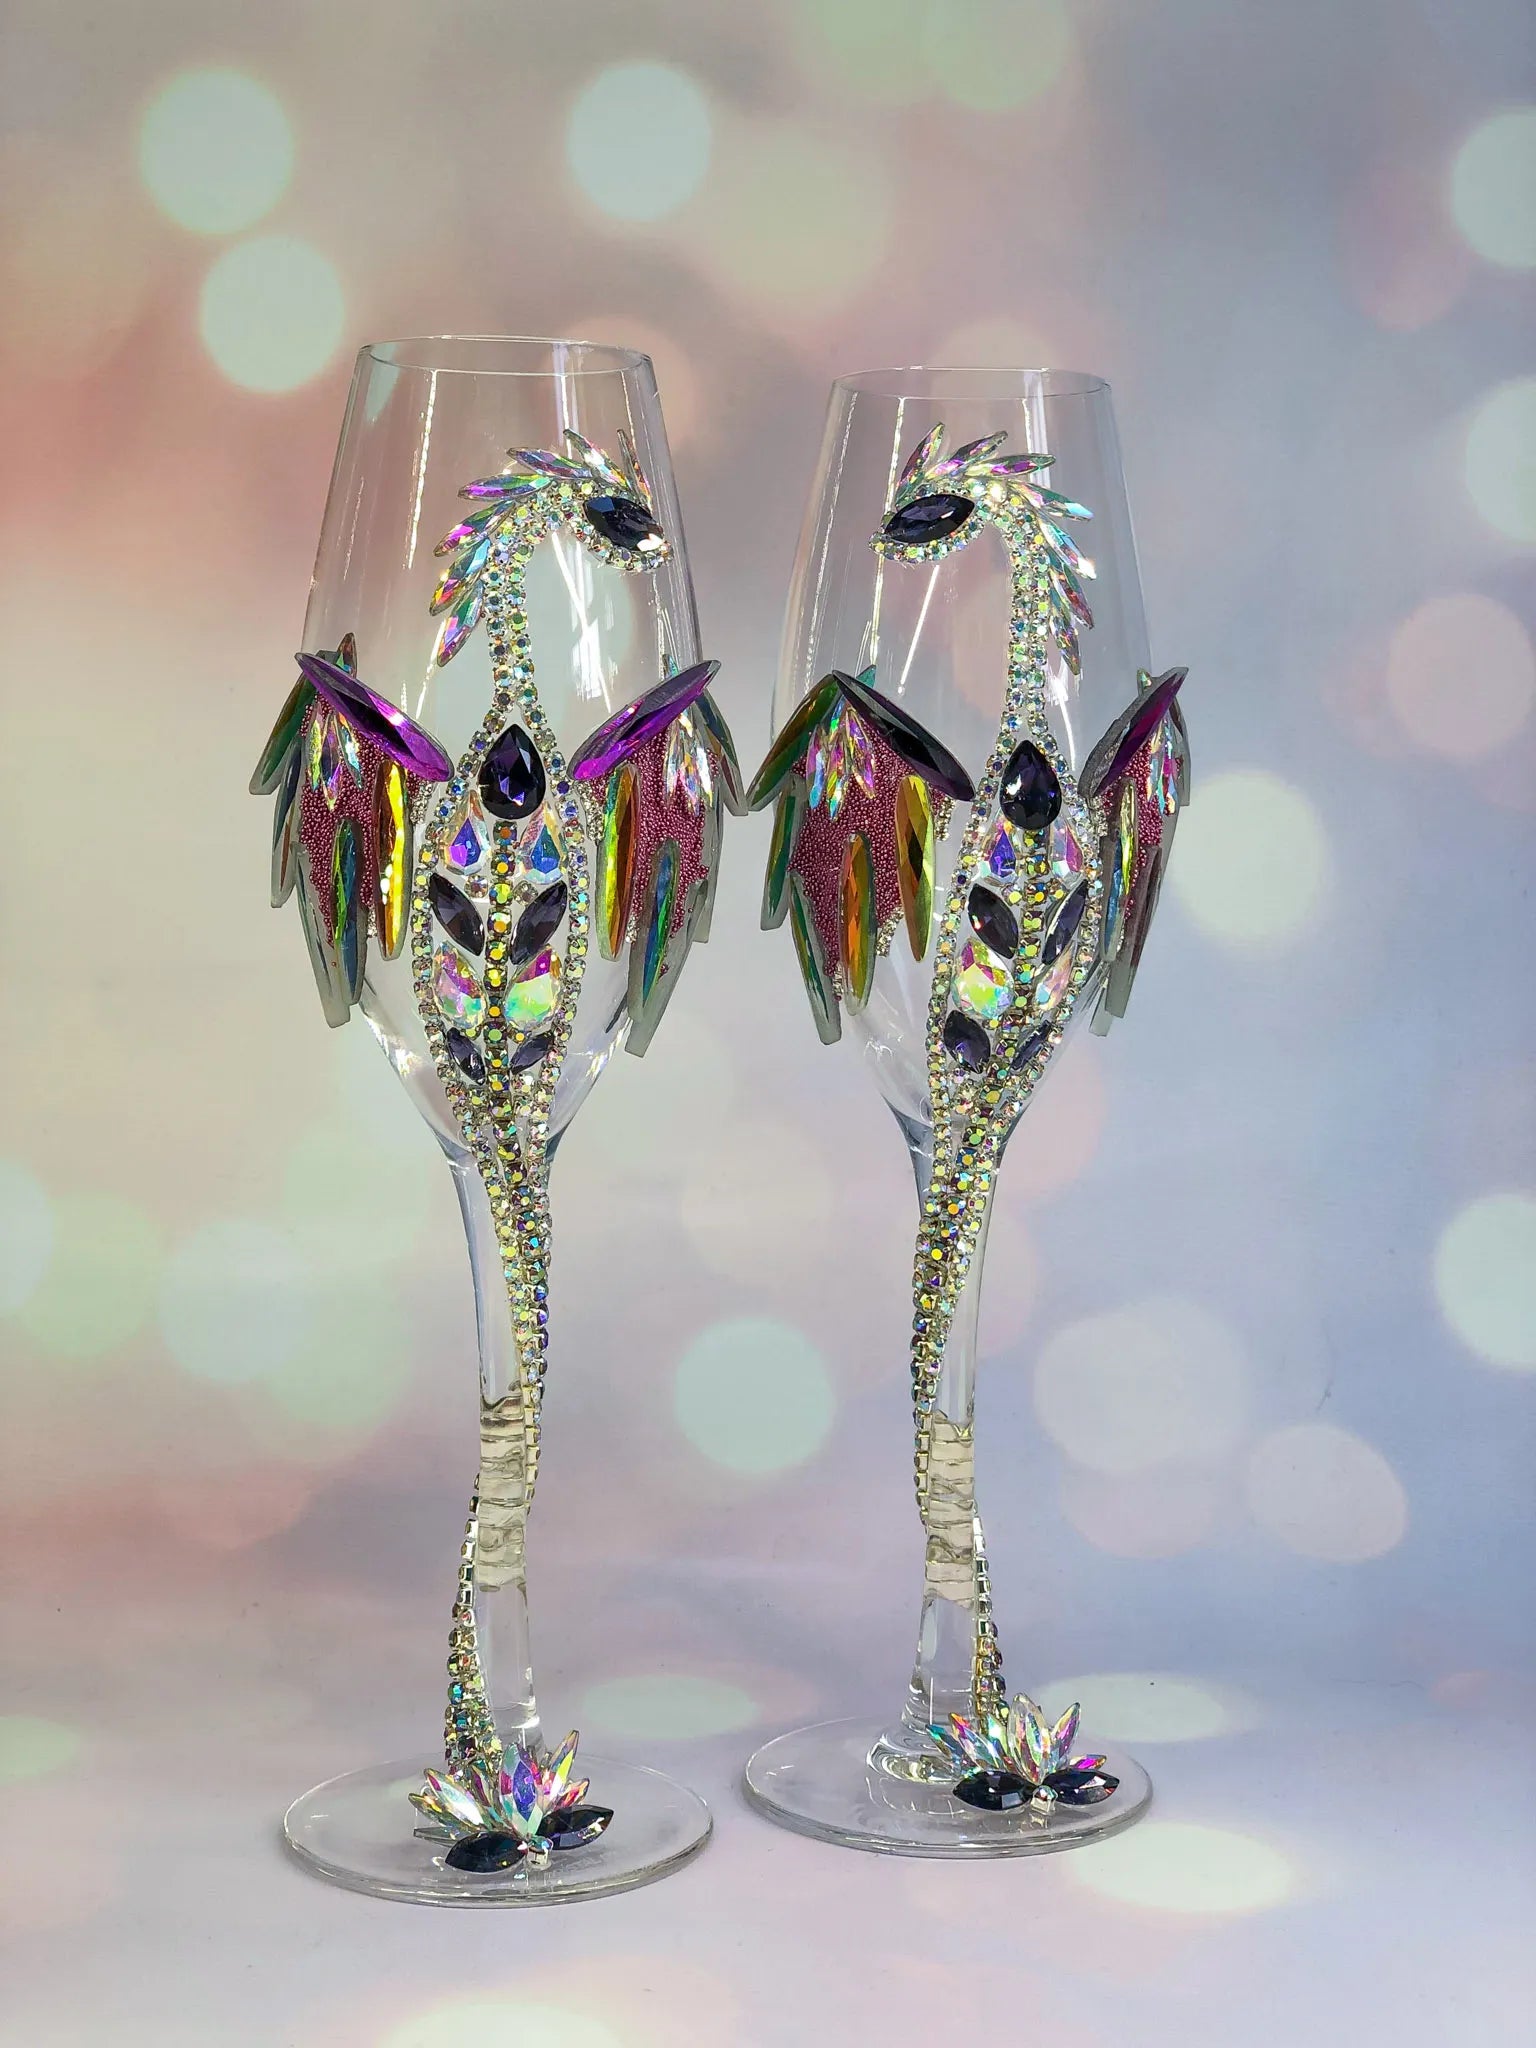 Iridescent Dragon Crystal Glasses  Handcrafted Mystical Drinkware